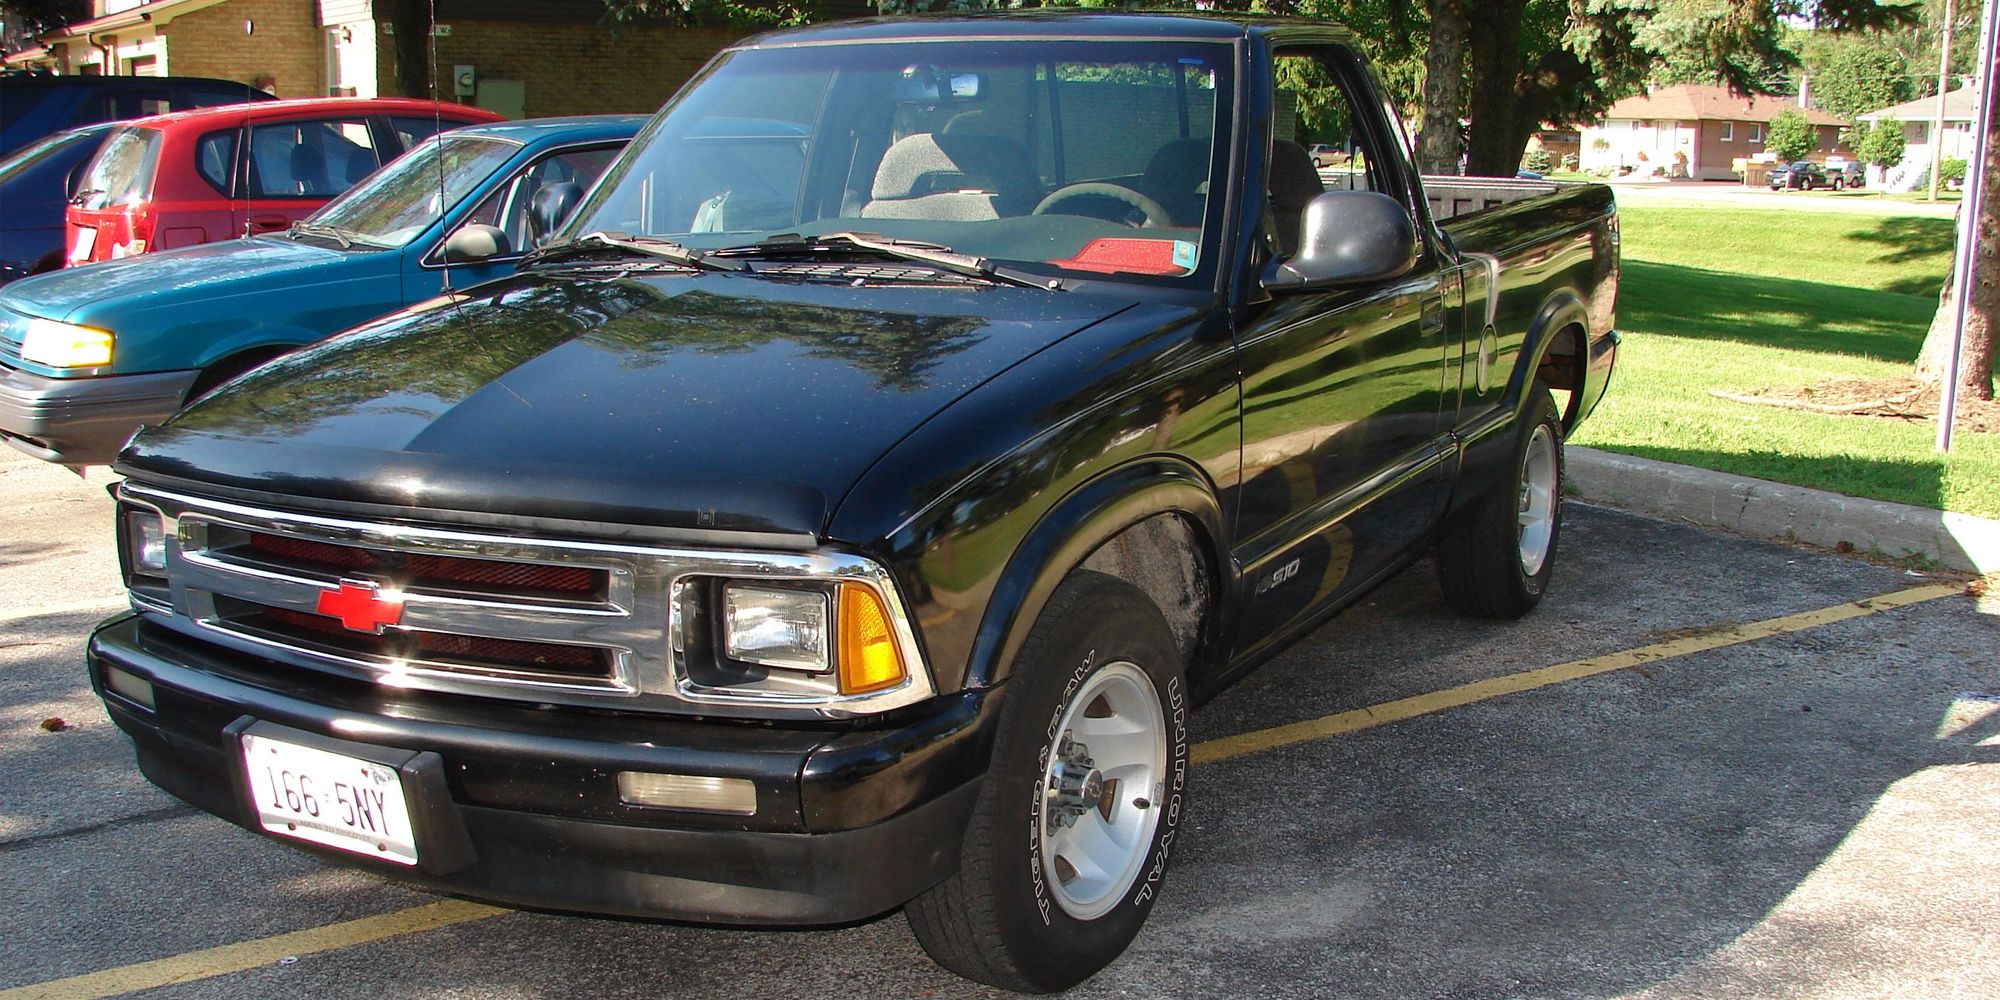 The front of the Chevy S-10